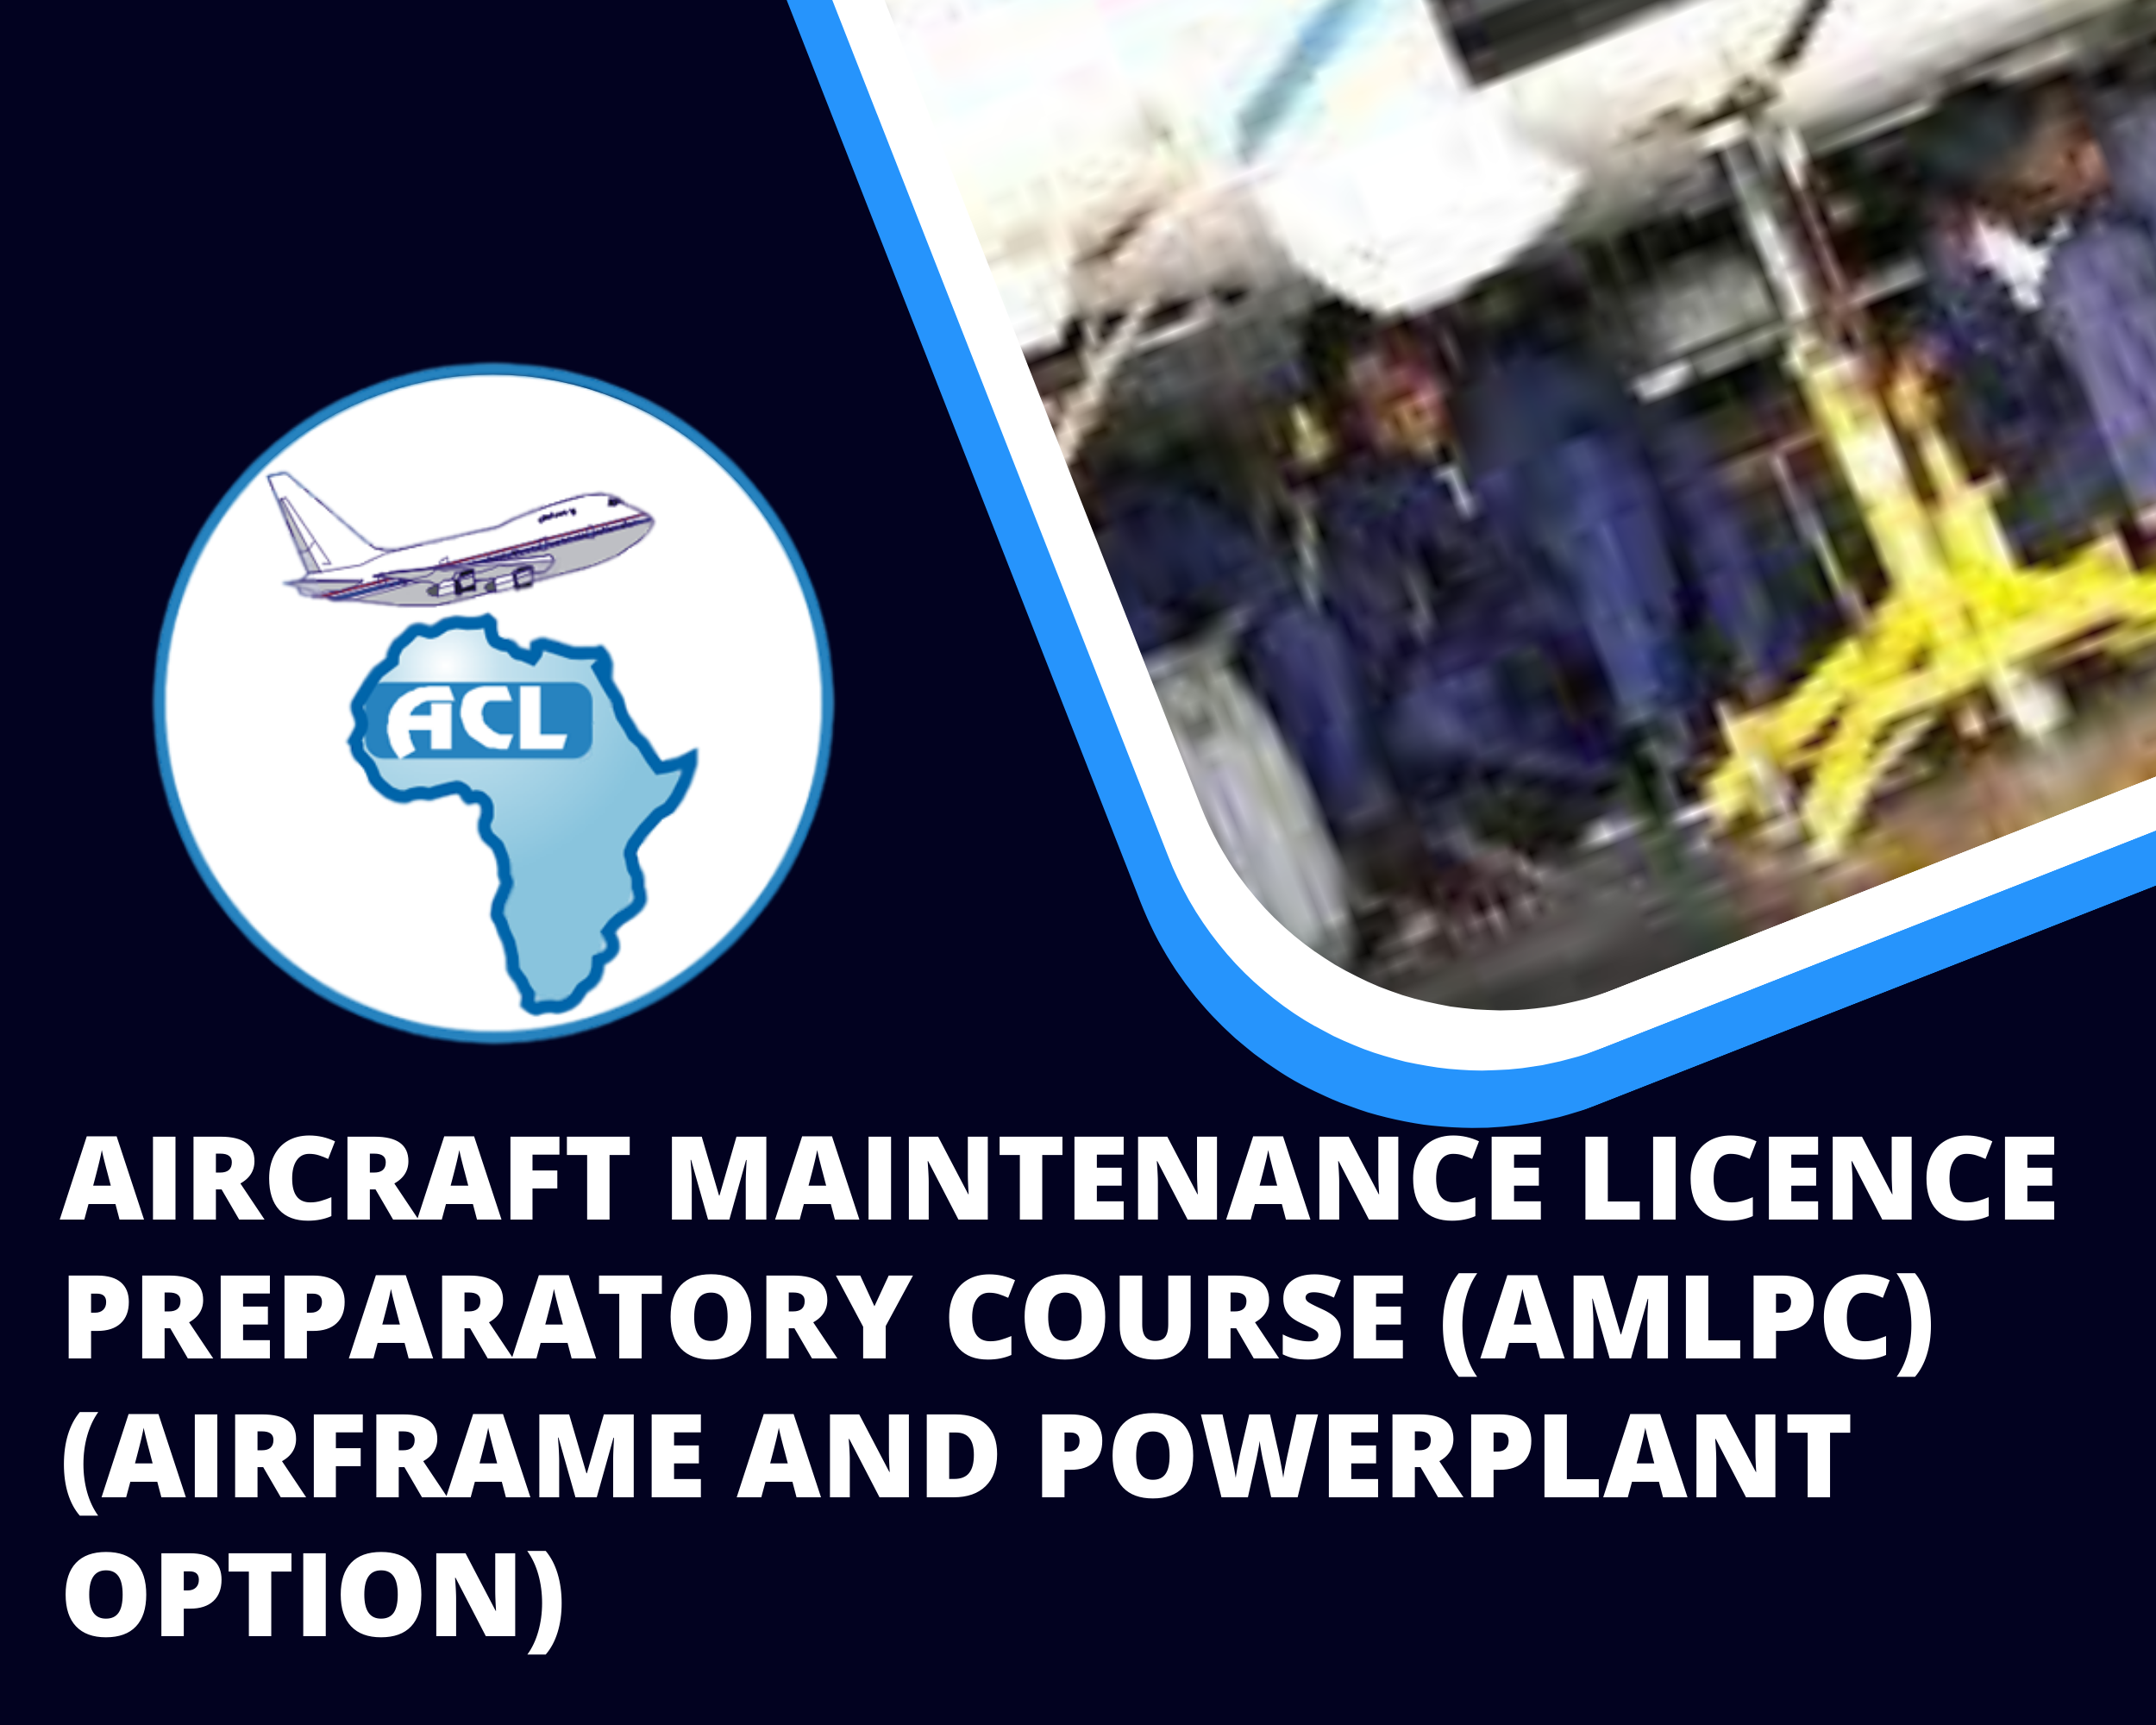 AIRCRAFT MAINTENANCE LICENCE PREPARATORY COURSE (AMLPC) (AIRFRAME AND POWERPLANT OPTION)   